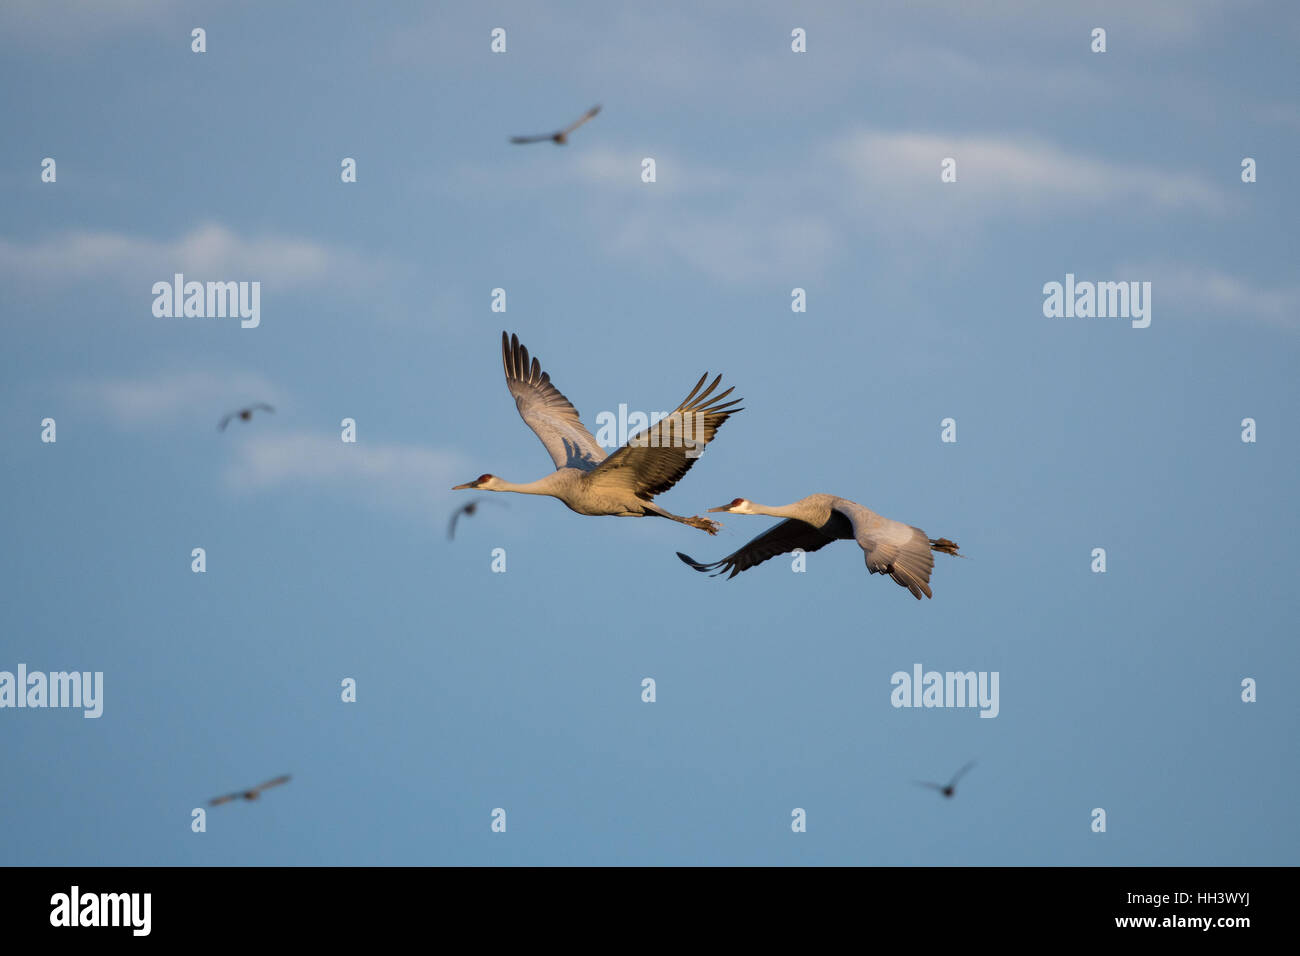 Sandhill Cranes, (Grus canadensis), flying.  Ladd S. Gordon Waterfowl Management Area, New Mexico, USA. Stock Photo